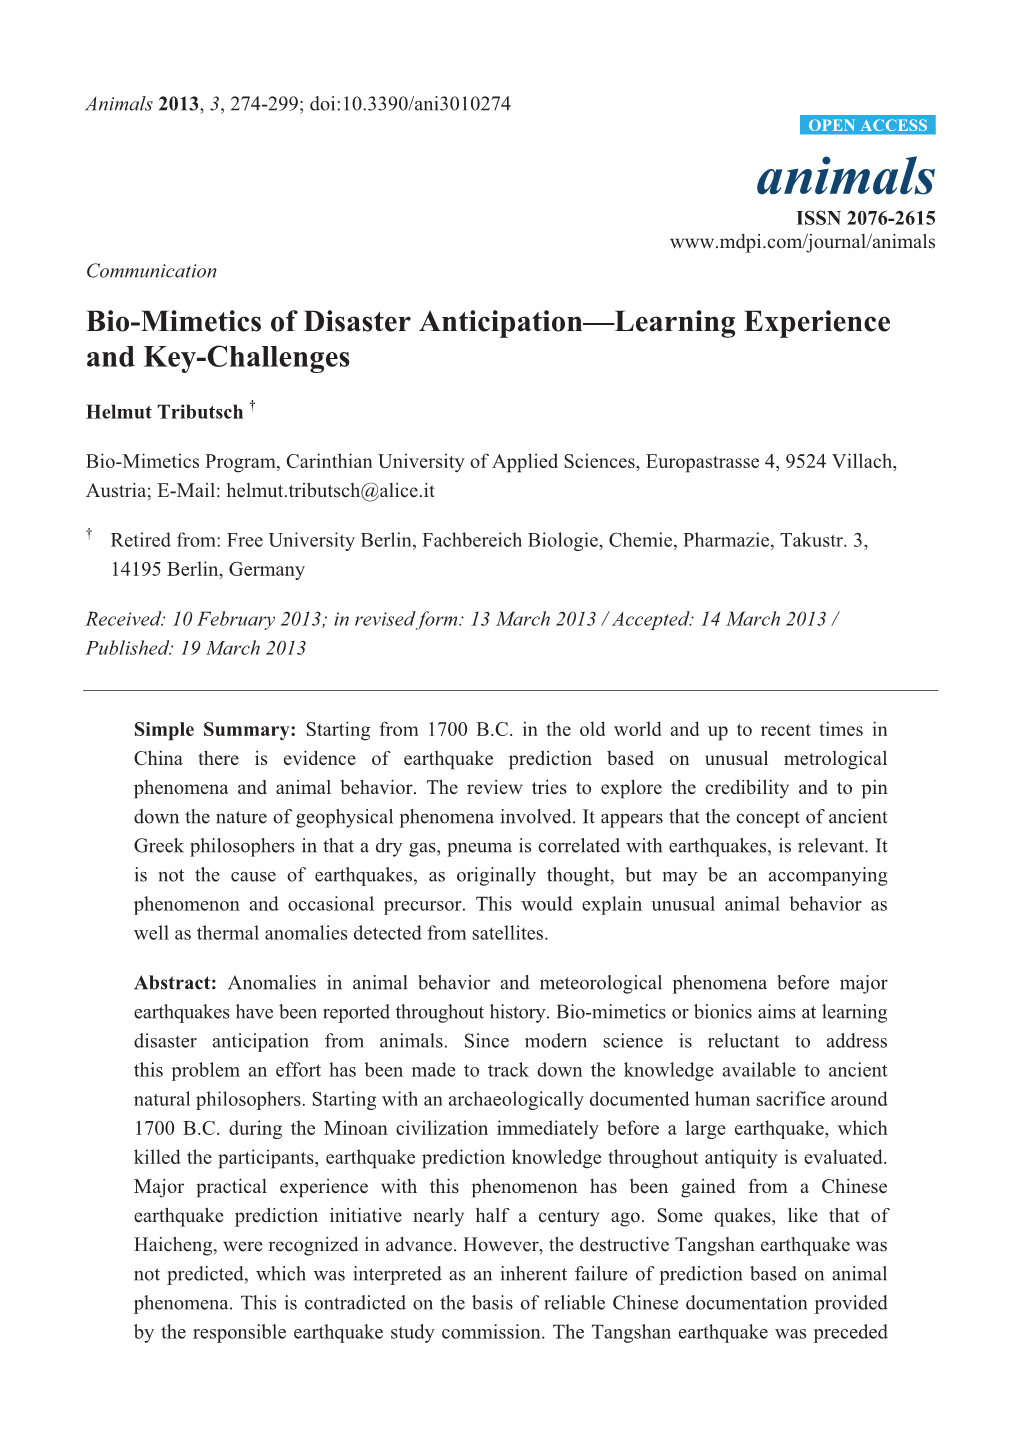 Bio-Mimetics of Disaster Anticipation—Learning Experience and Key-Challenges